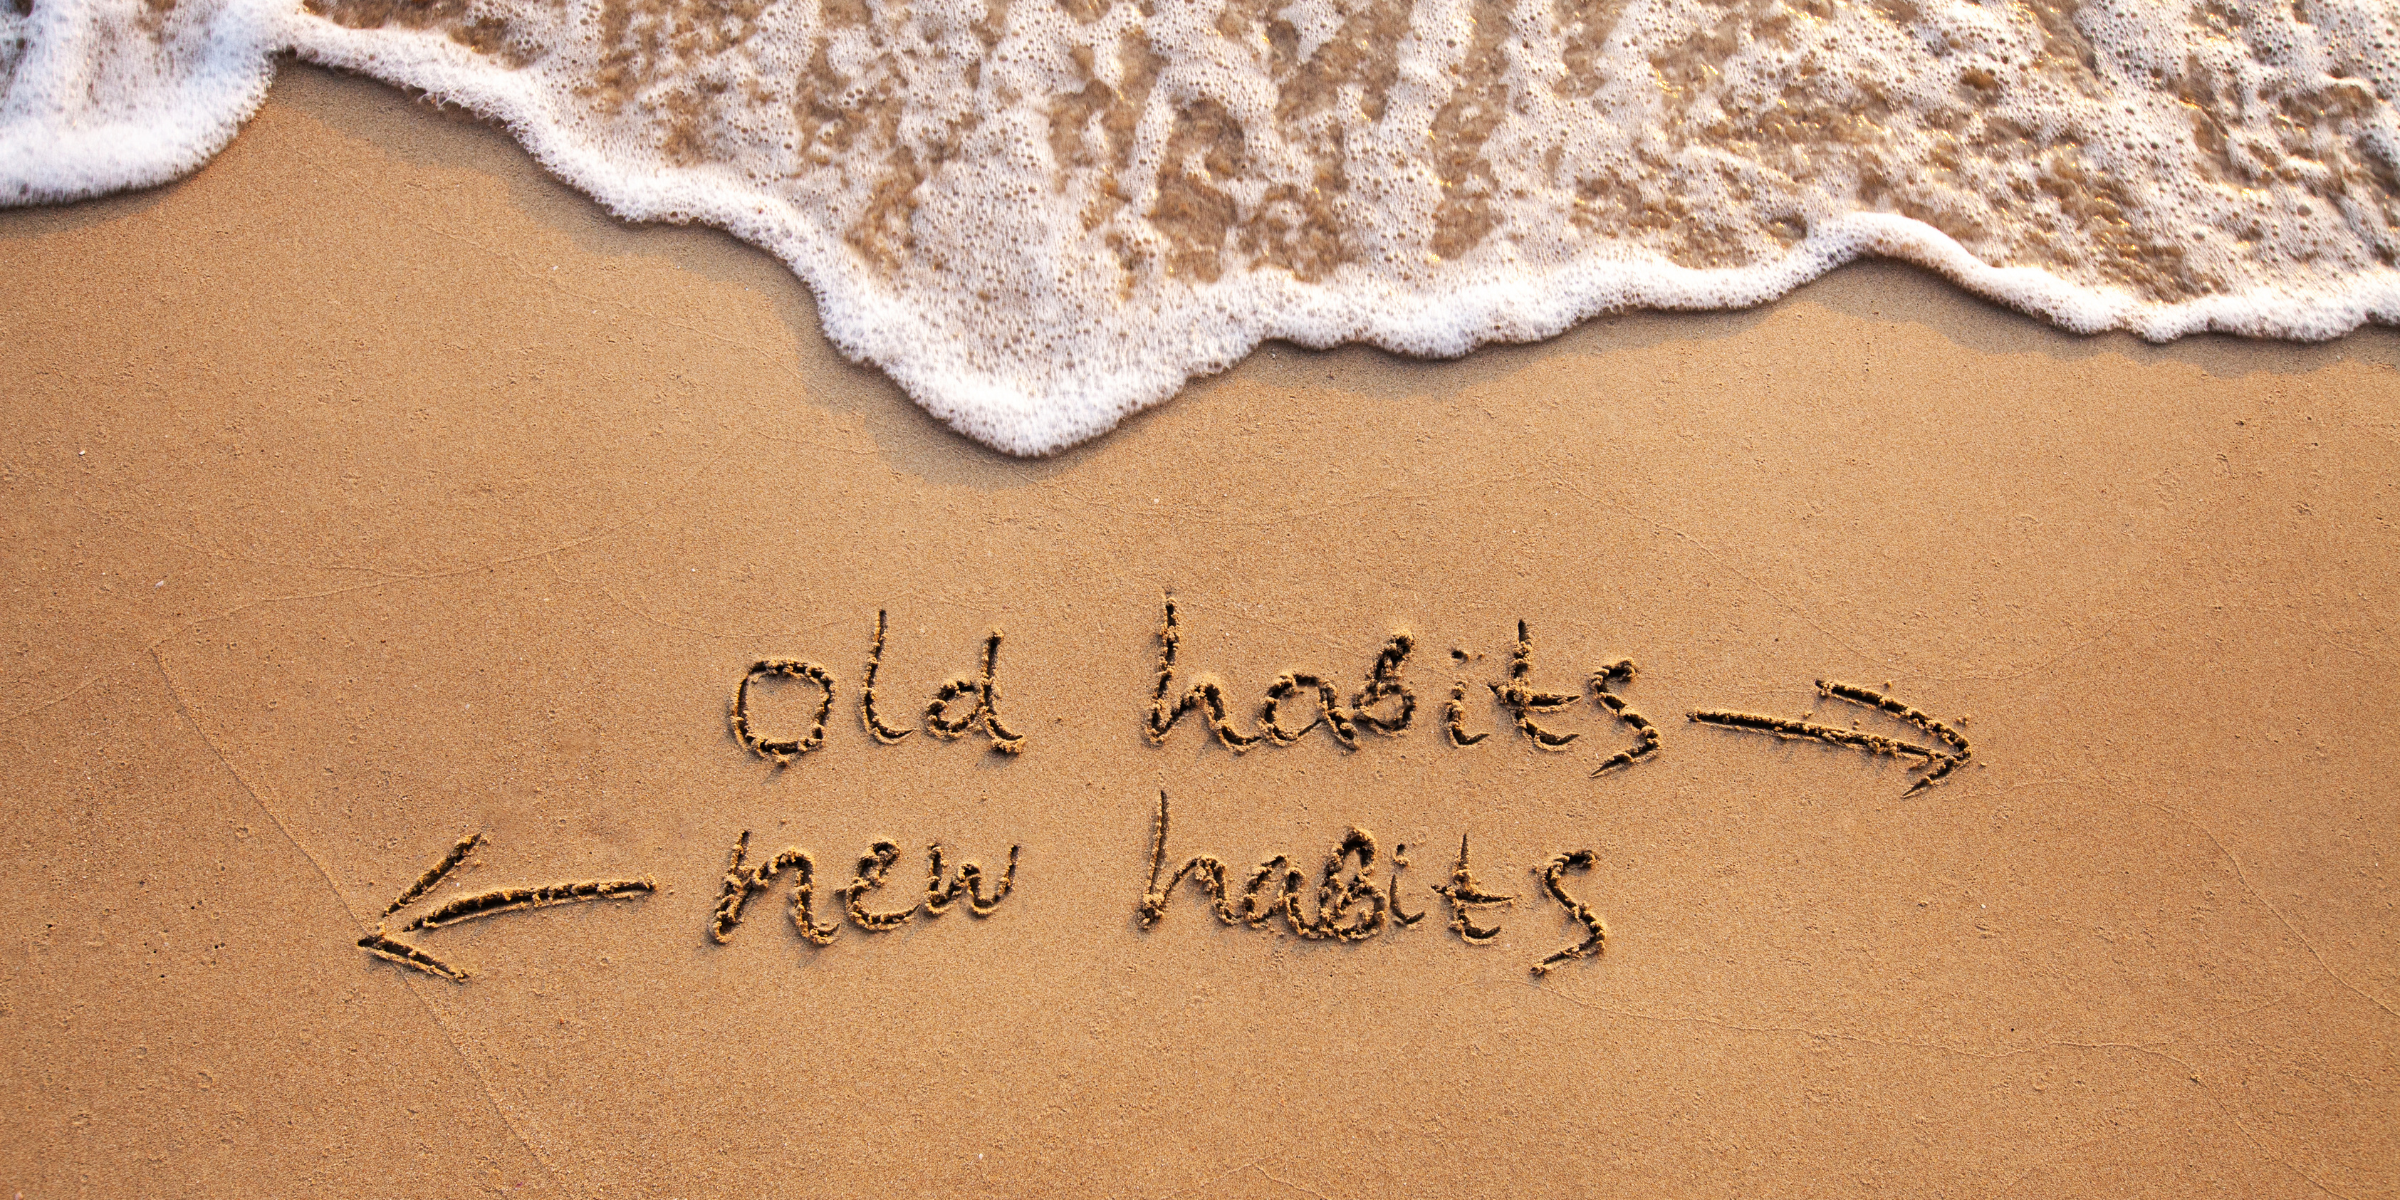 4 Ways to Break Your Bad Habits & Replace Them with Better Ones